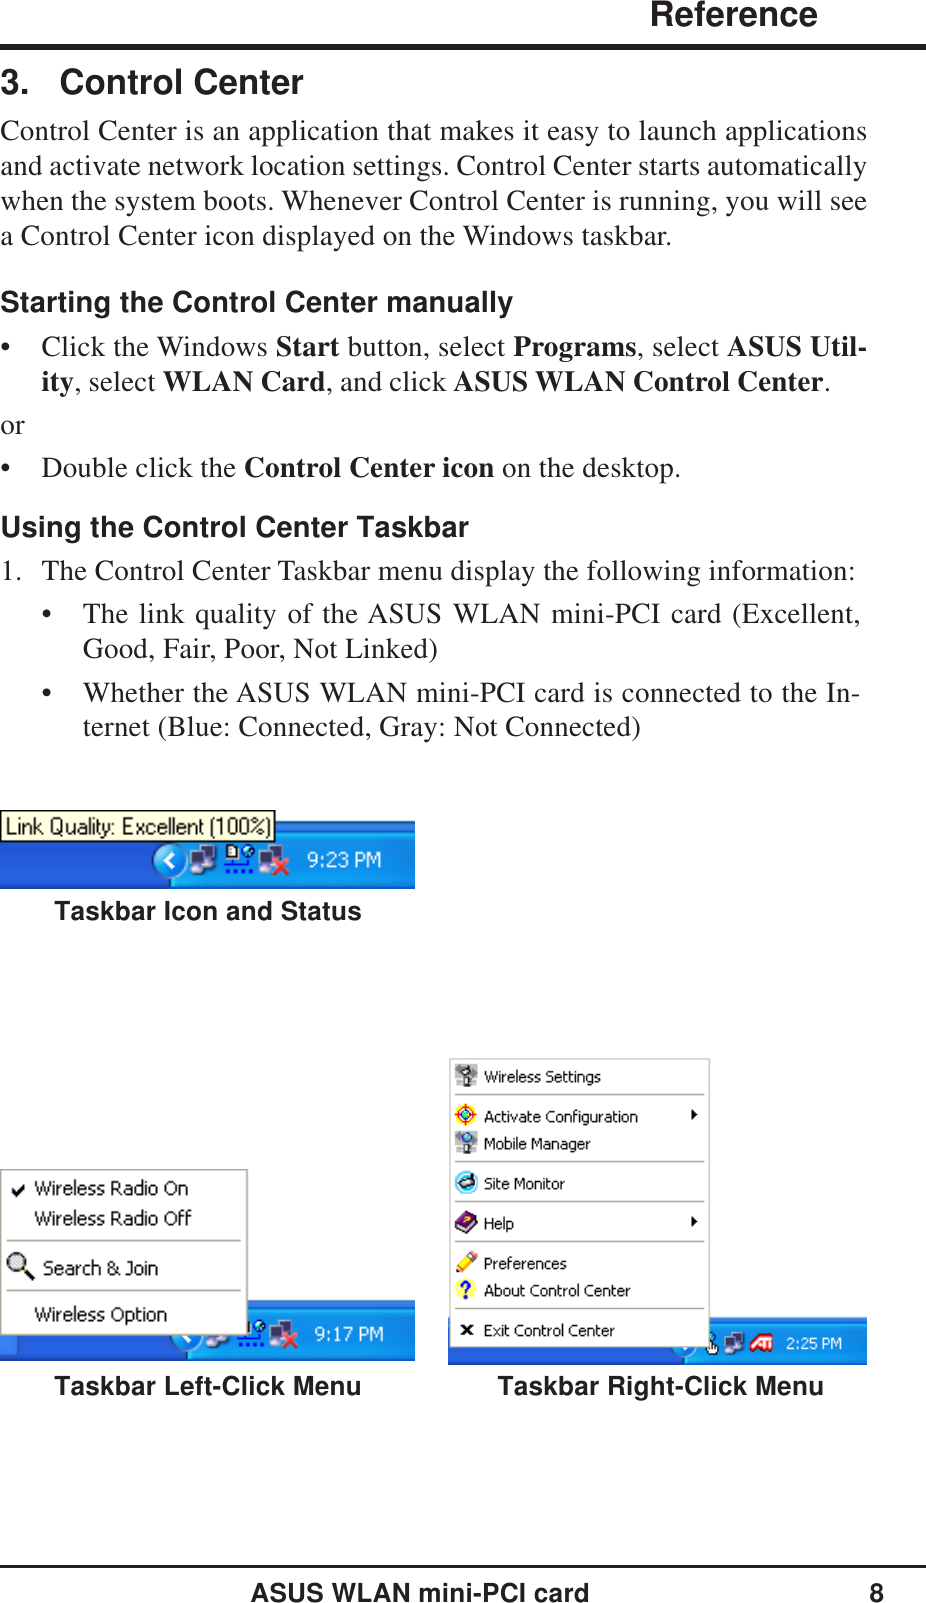 ASUS WLAN mini-PCI card 8                   ReferenceChapter 33. Control CenterControl Center is an application that makes it easy to launch applicationsand activate network location settings. Control Center starts automaticallywhen the system boots. Whenever Control Center is running, you will seea Control Center icon displayed on the Windows taskbar.Starting the Control Center manually• Click the Windows Start button, select Programs, select ASUS Util-ity, select WLAN Card, and click ASUS WLAN Control Center.or• Double click the Control Center icon on the desktop.Using the Control Center Taskbar1. The Control Center Taskbar menu display the following information:• The link quality of the ASUS WLAN mini-PCI card (Excellent,Good, Fair, Poor, Not Linked)• Whether the ASUS WLAN mini-PCI card is connected to the In-ternet (Blue: Connected, Gray: Not Connected)Taskbar Right-Click MenuTaskbar Icon and StatusTaskbar Left-Click Menu